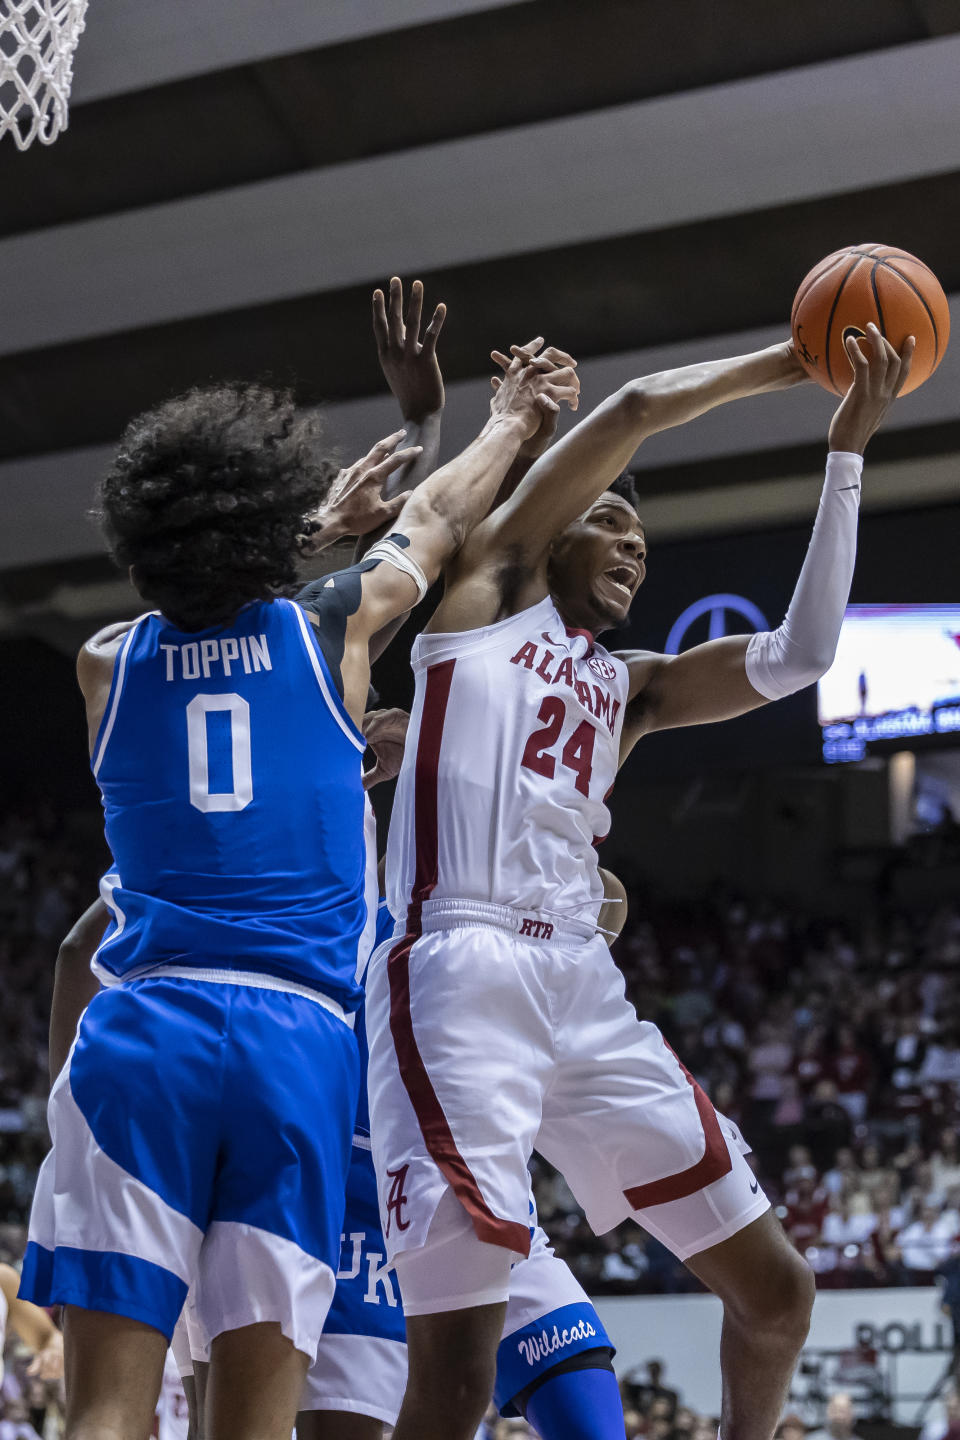 Alabama forward Brandon Miller (24) works for a rebound against Kentucky forward Jacob Toppin (0) during the first half of an NCAA college basketball game, Saturday, Jan. 7, 2023, in Tuscaloosa, Ala. (AP Photo/Vasha Hunt)